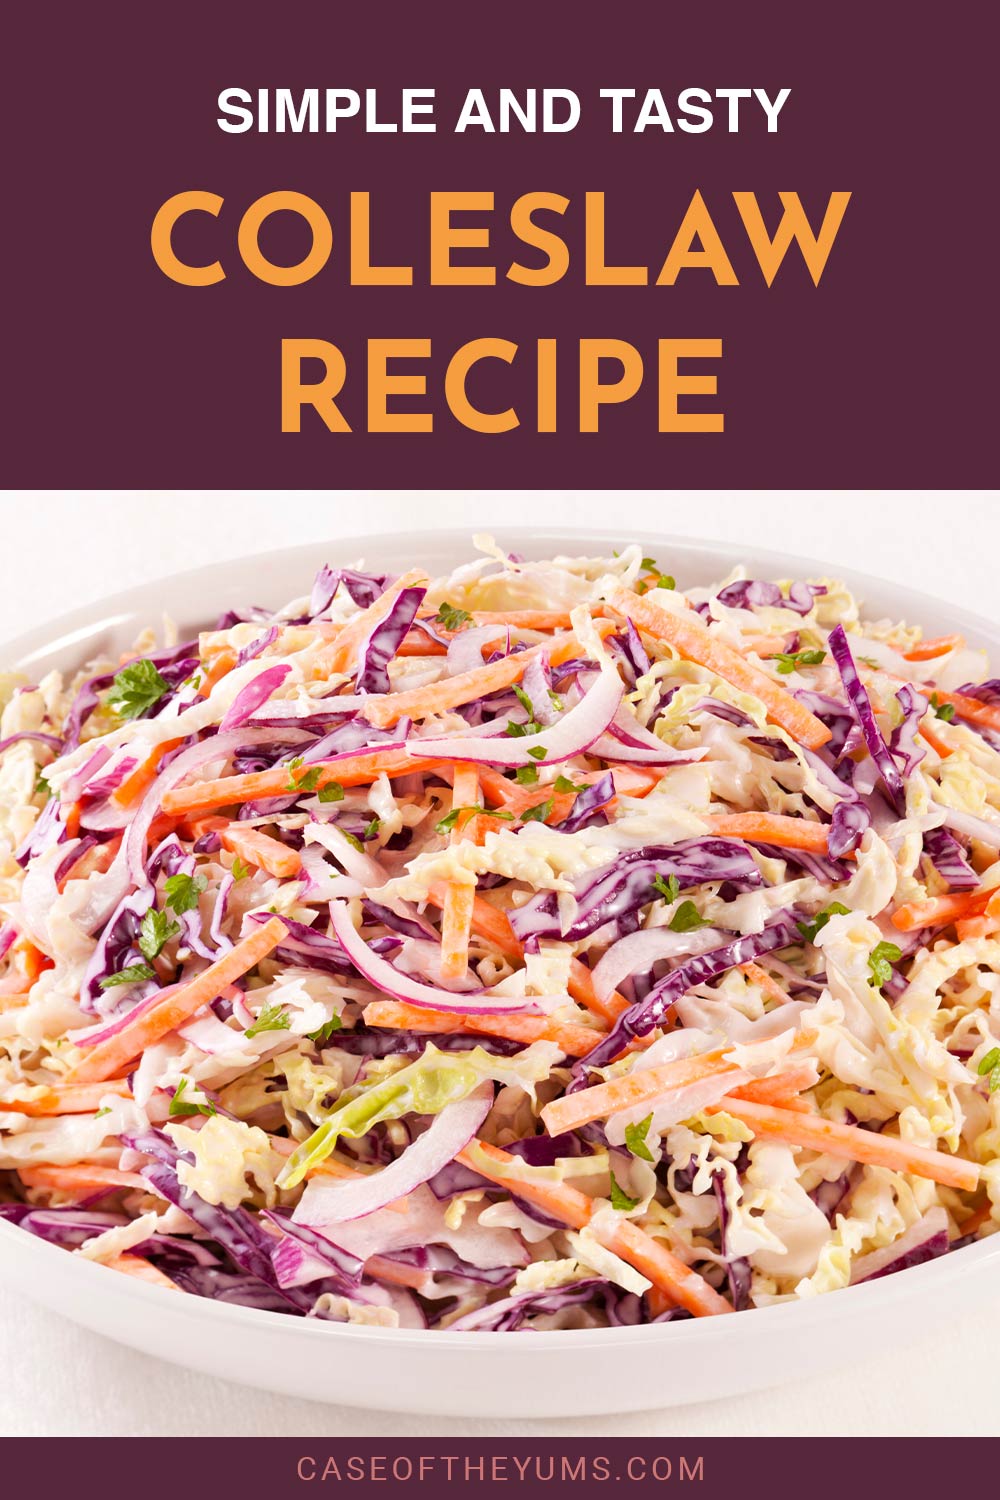 coleslaw in a white bowl - Simple and Tasty Coleslaw Recipe.